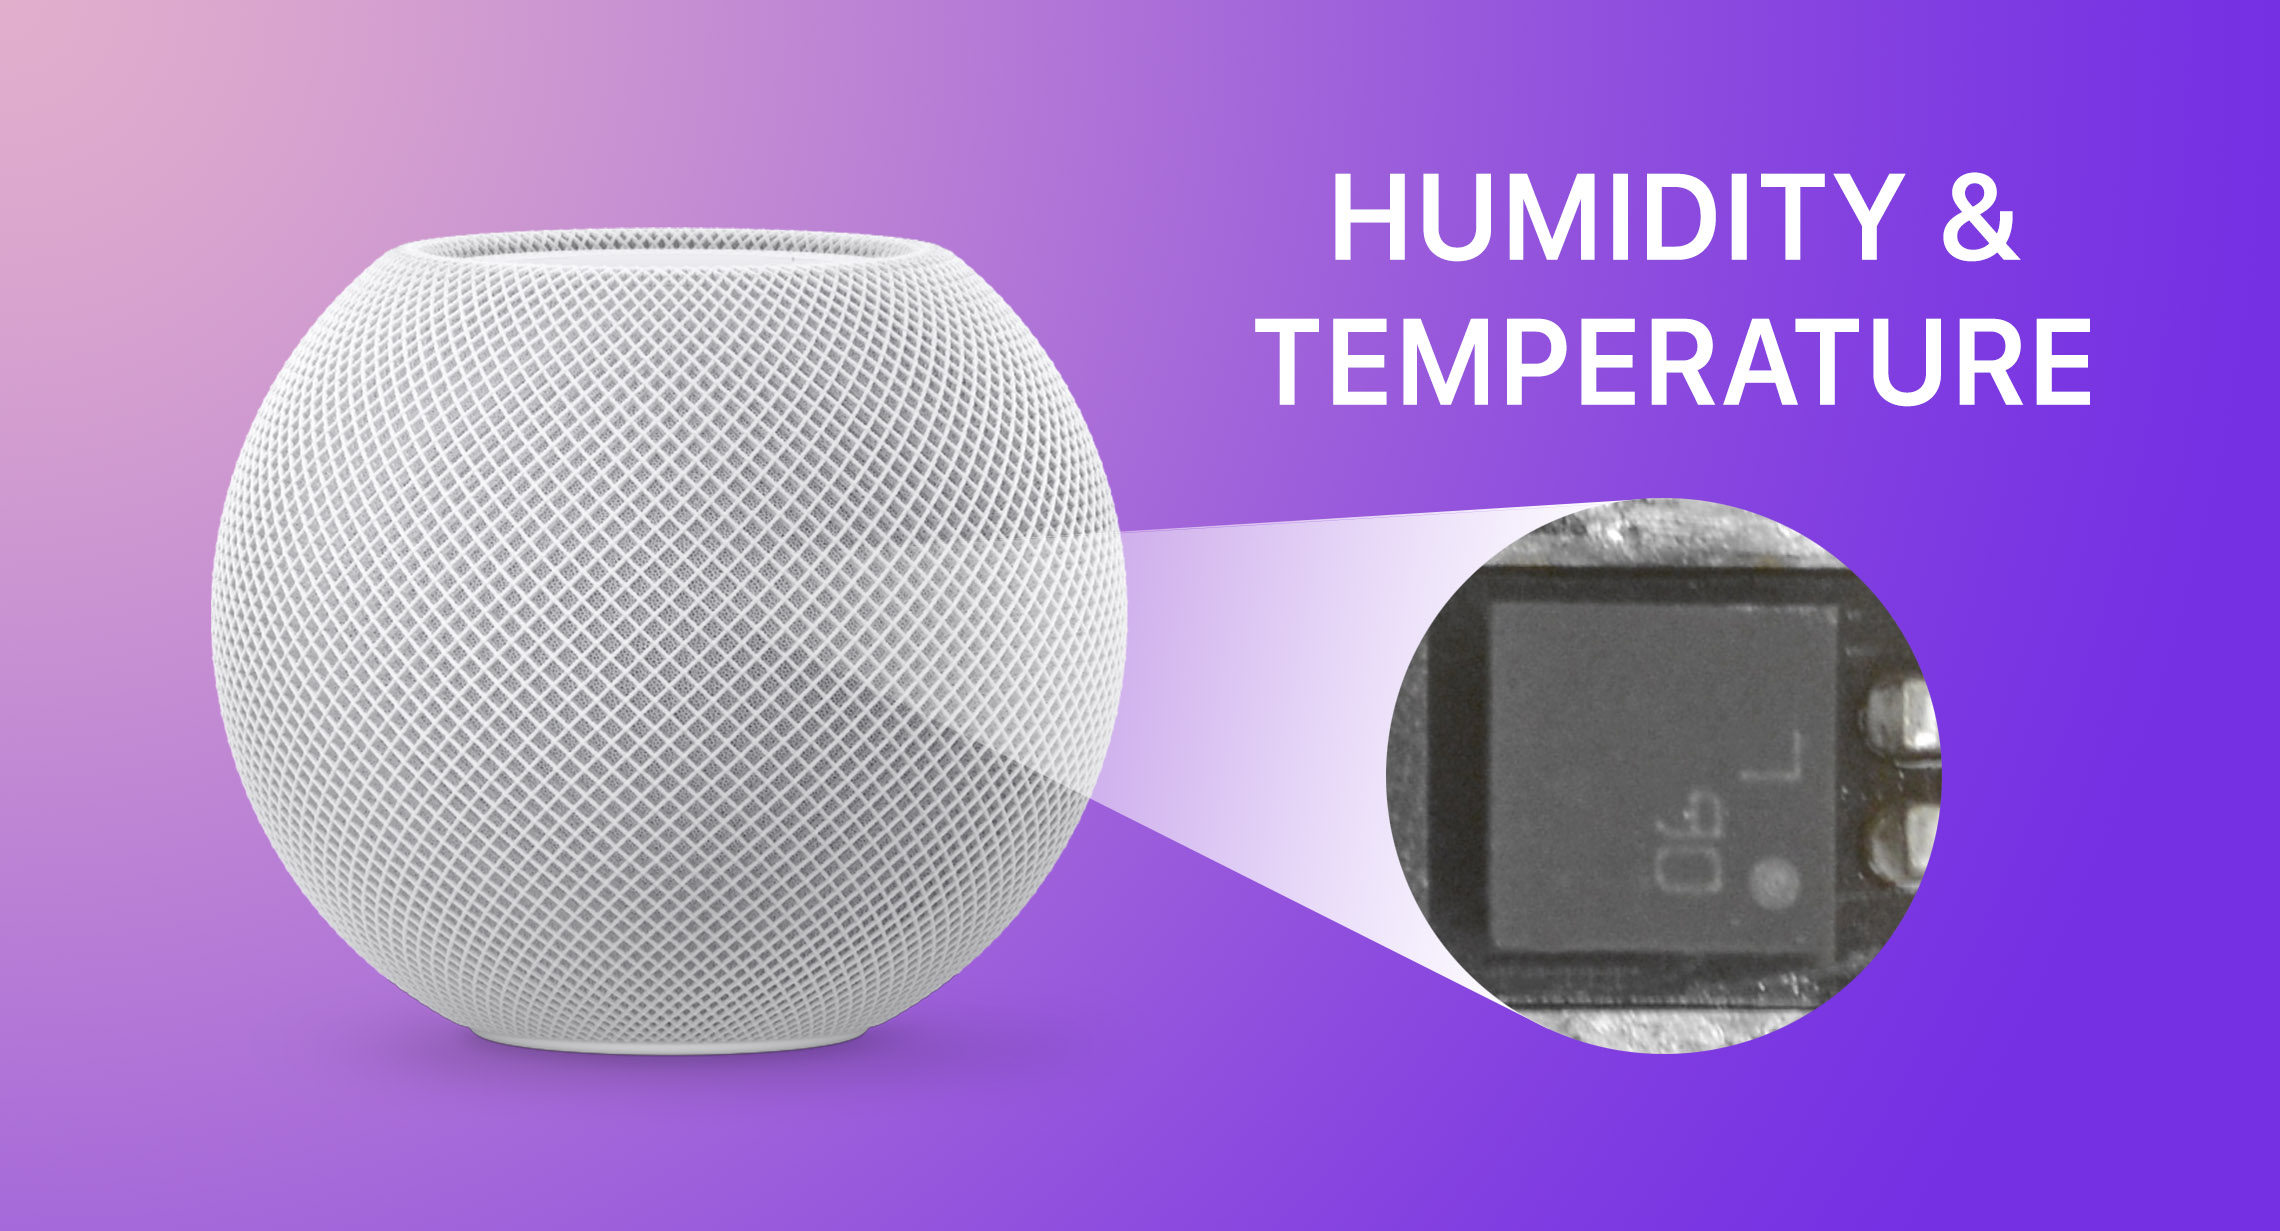 How to Use the Temperature and Humidity Sensors on HomePod and HomePod Mini